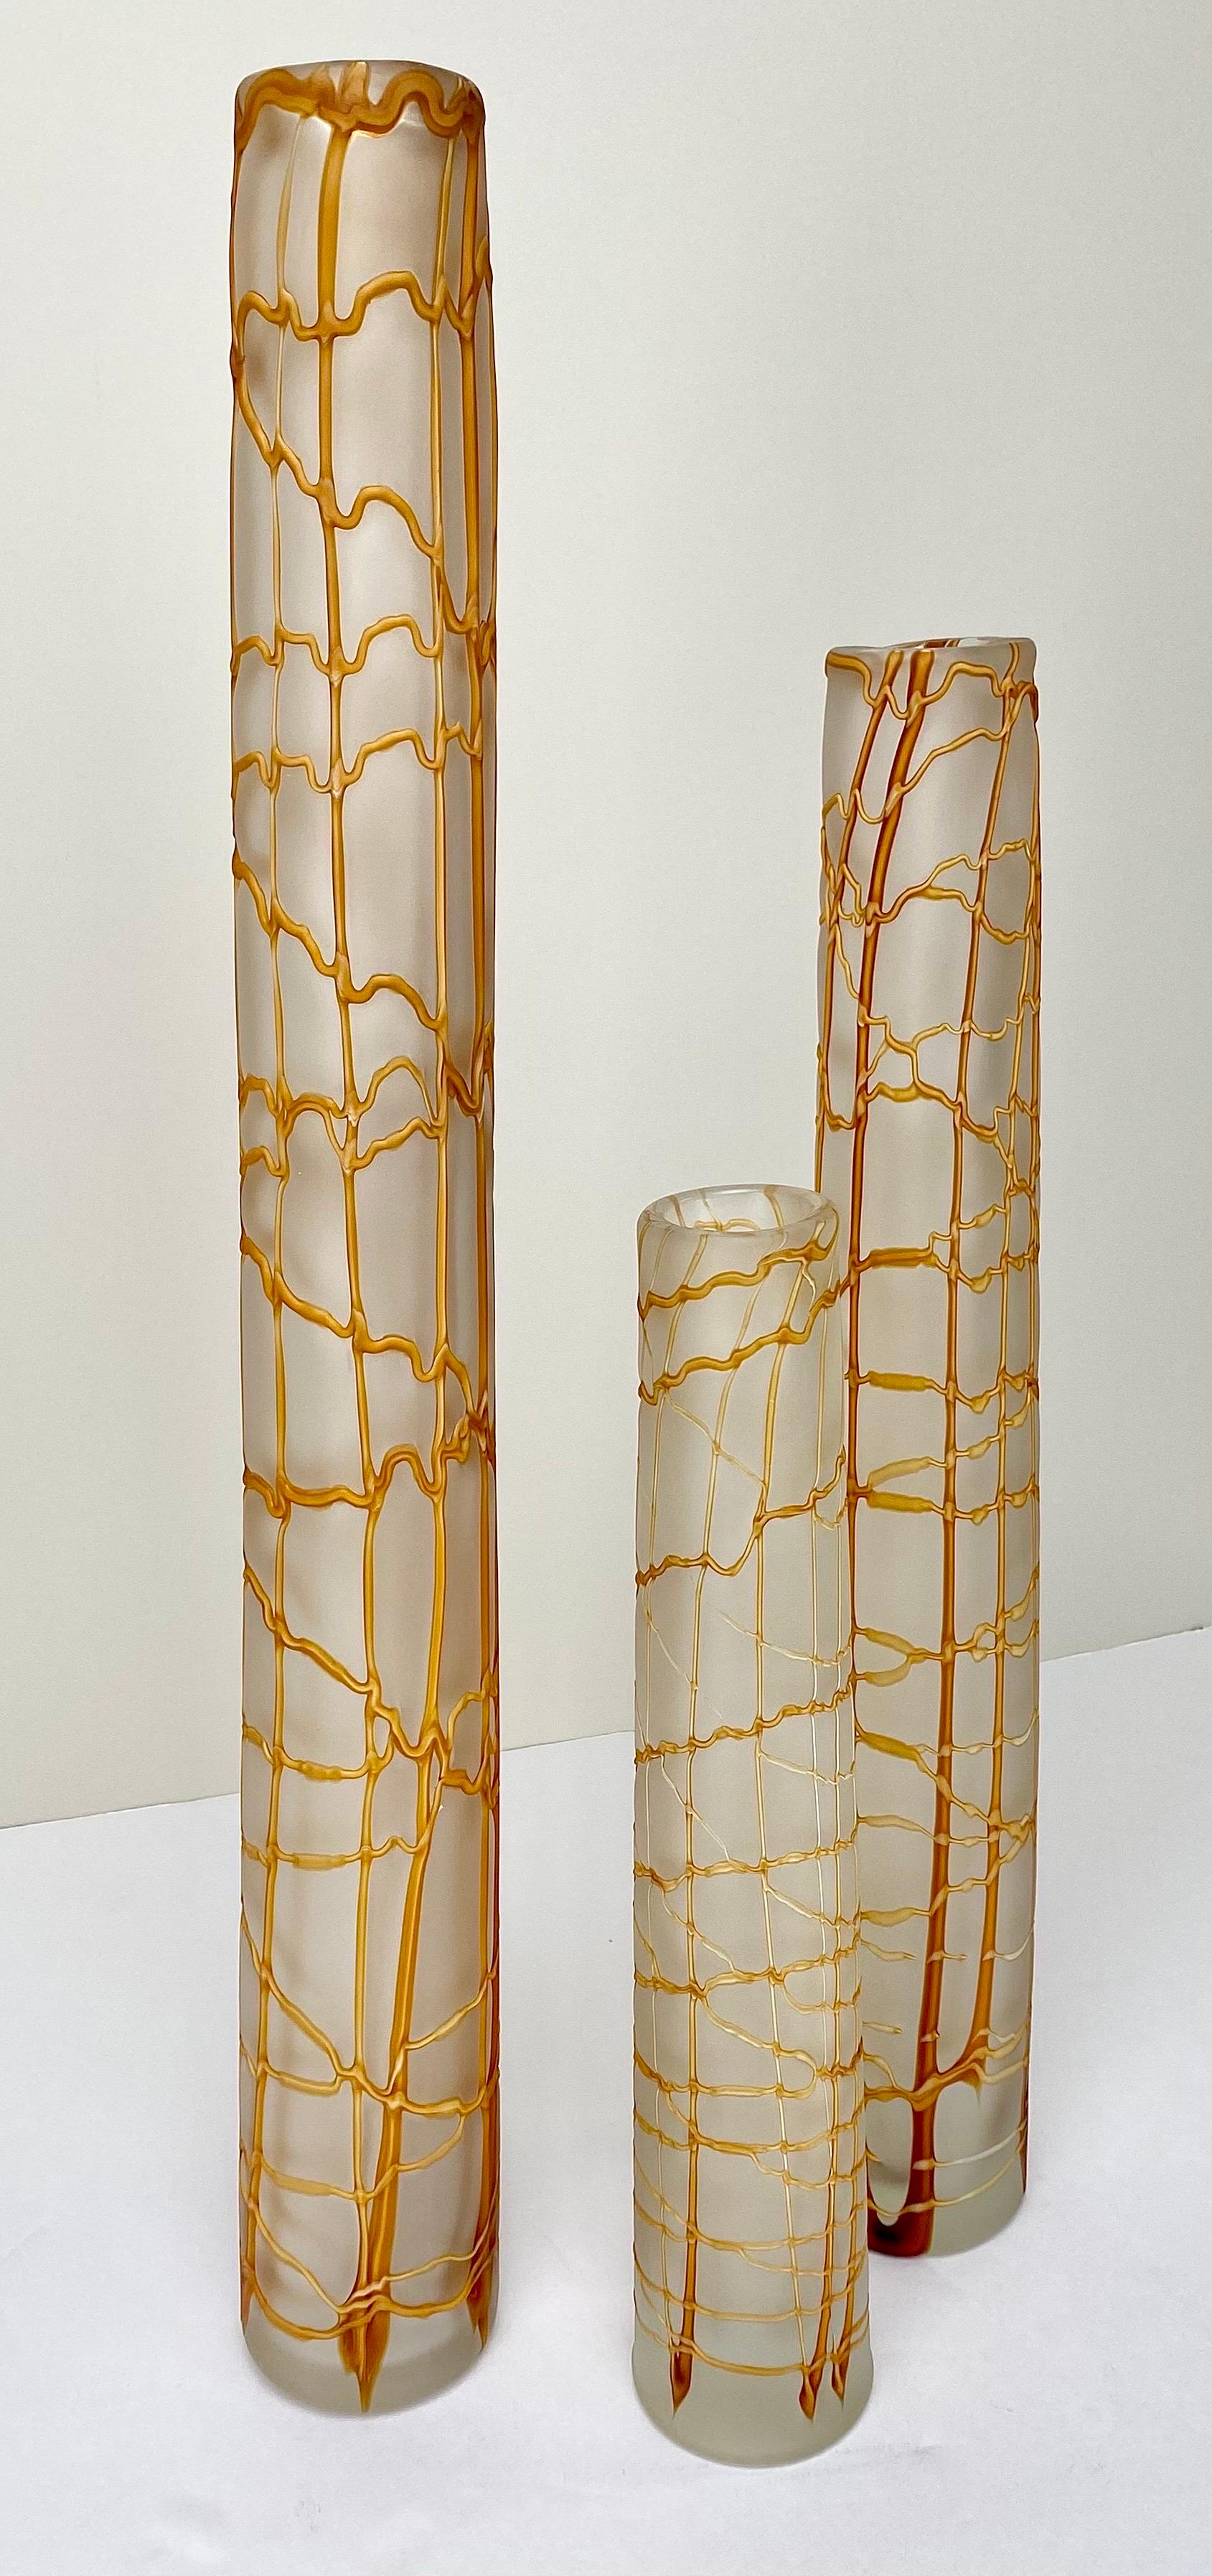 Modern Kintsugi Style Frosted Glass Vase, a Set of 3  In Good Condition For Sale In Plainview, NY